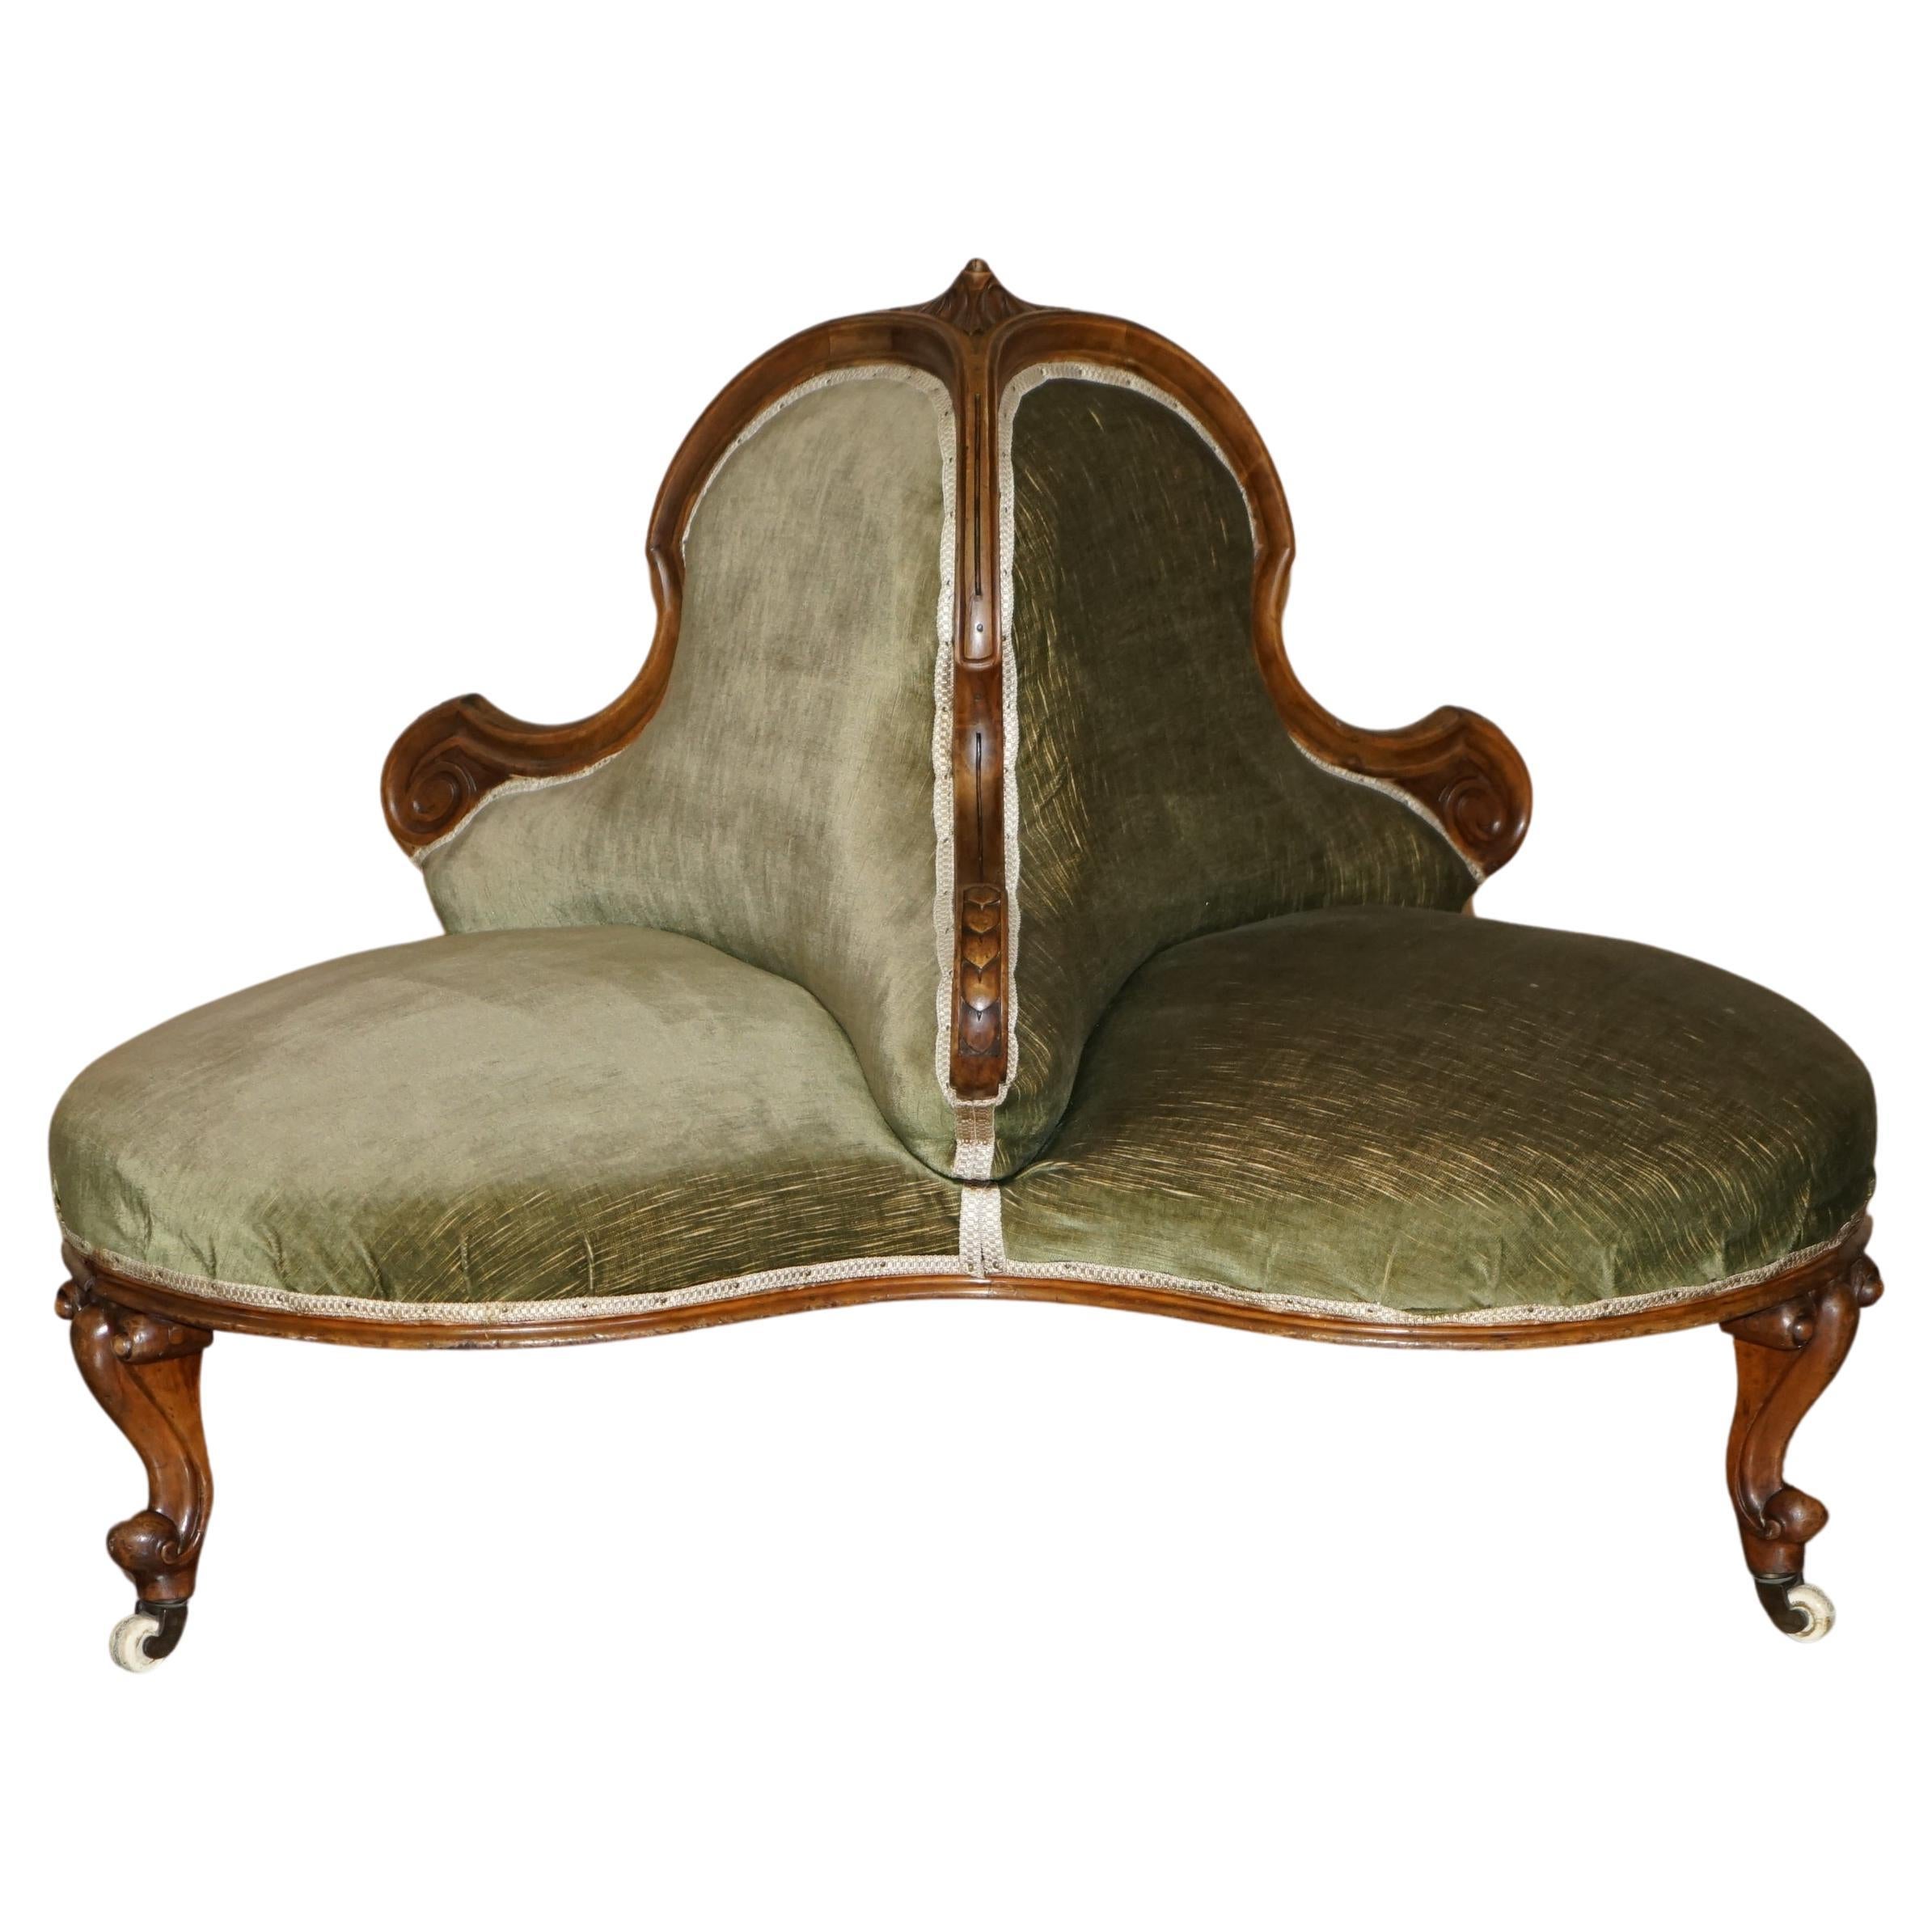 
Royal House Antiques

Royal House Antiques is delighted to offer for sale lovely Victorian circa 1860-1880, beautifully shaped “Tete a Tete” Conversation couch seat with an ornately carved Mahogany frame finished with original period porcelain